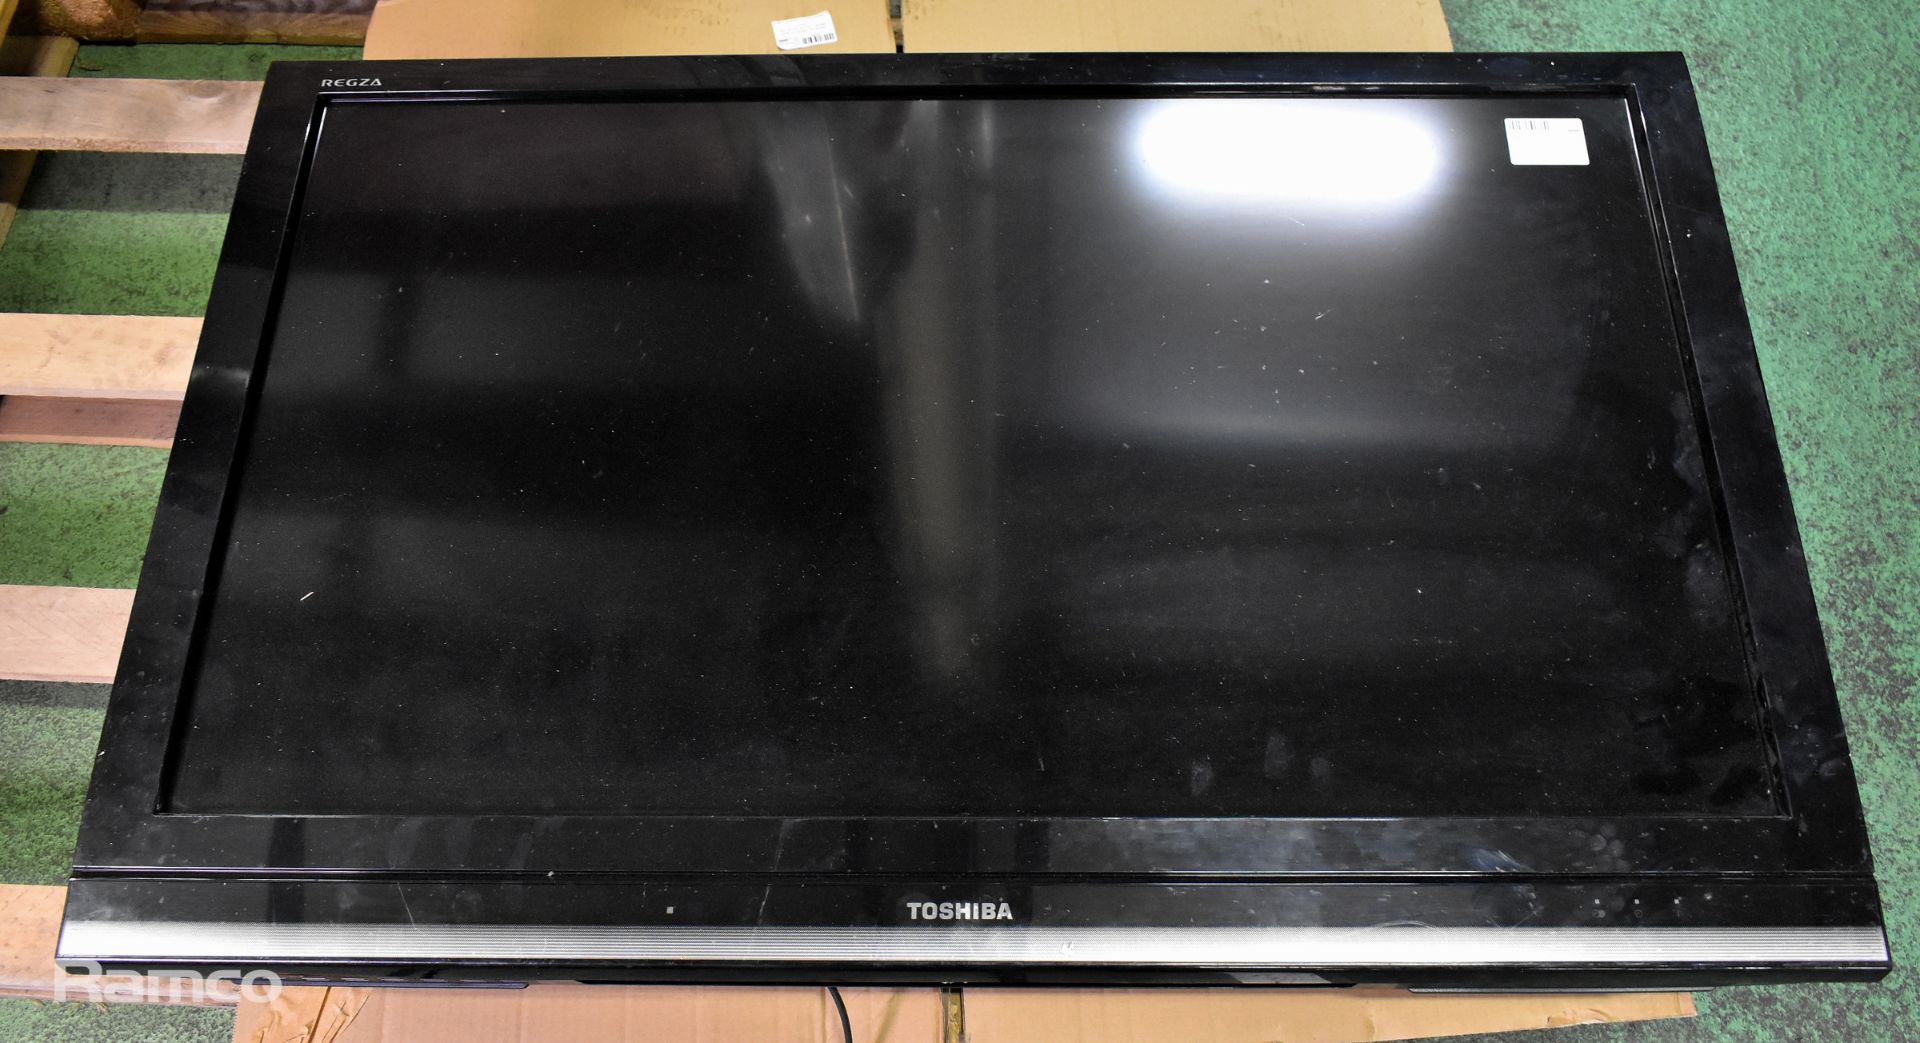 Toshiba Regza 40RV753 LCD color TV with wall mount bracket - W 970 x D 180 x H 620 mm, Samsung DB22D - Image 6 of 9